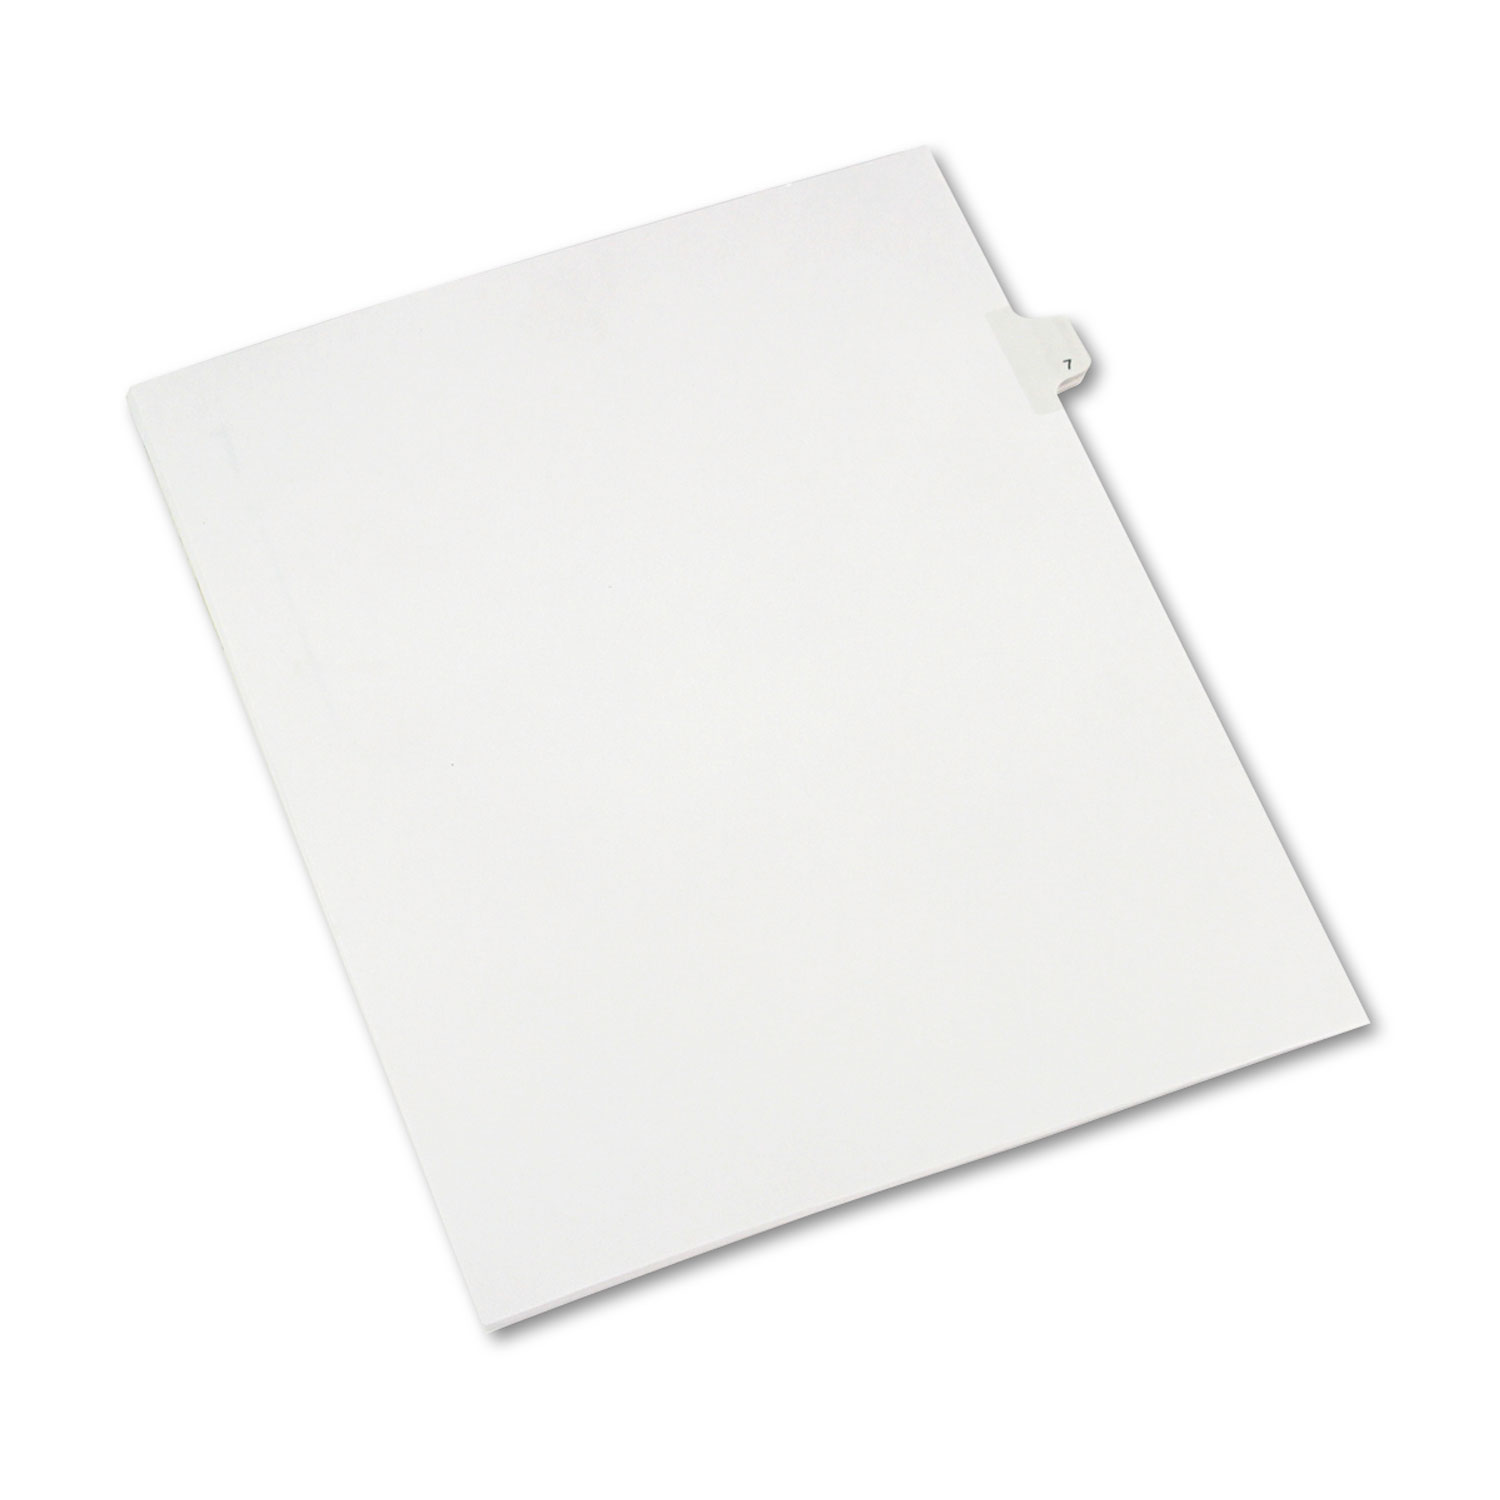 Allstate-Style Legal Exhibit Side Tab Divider, Title: 7, Letter, White, 25/Pack